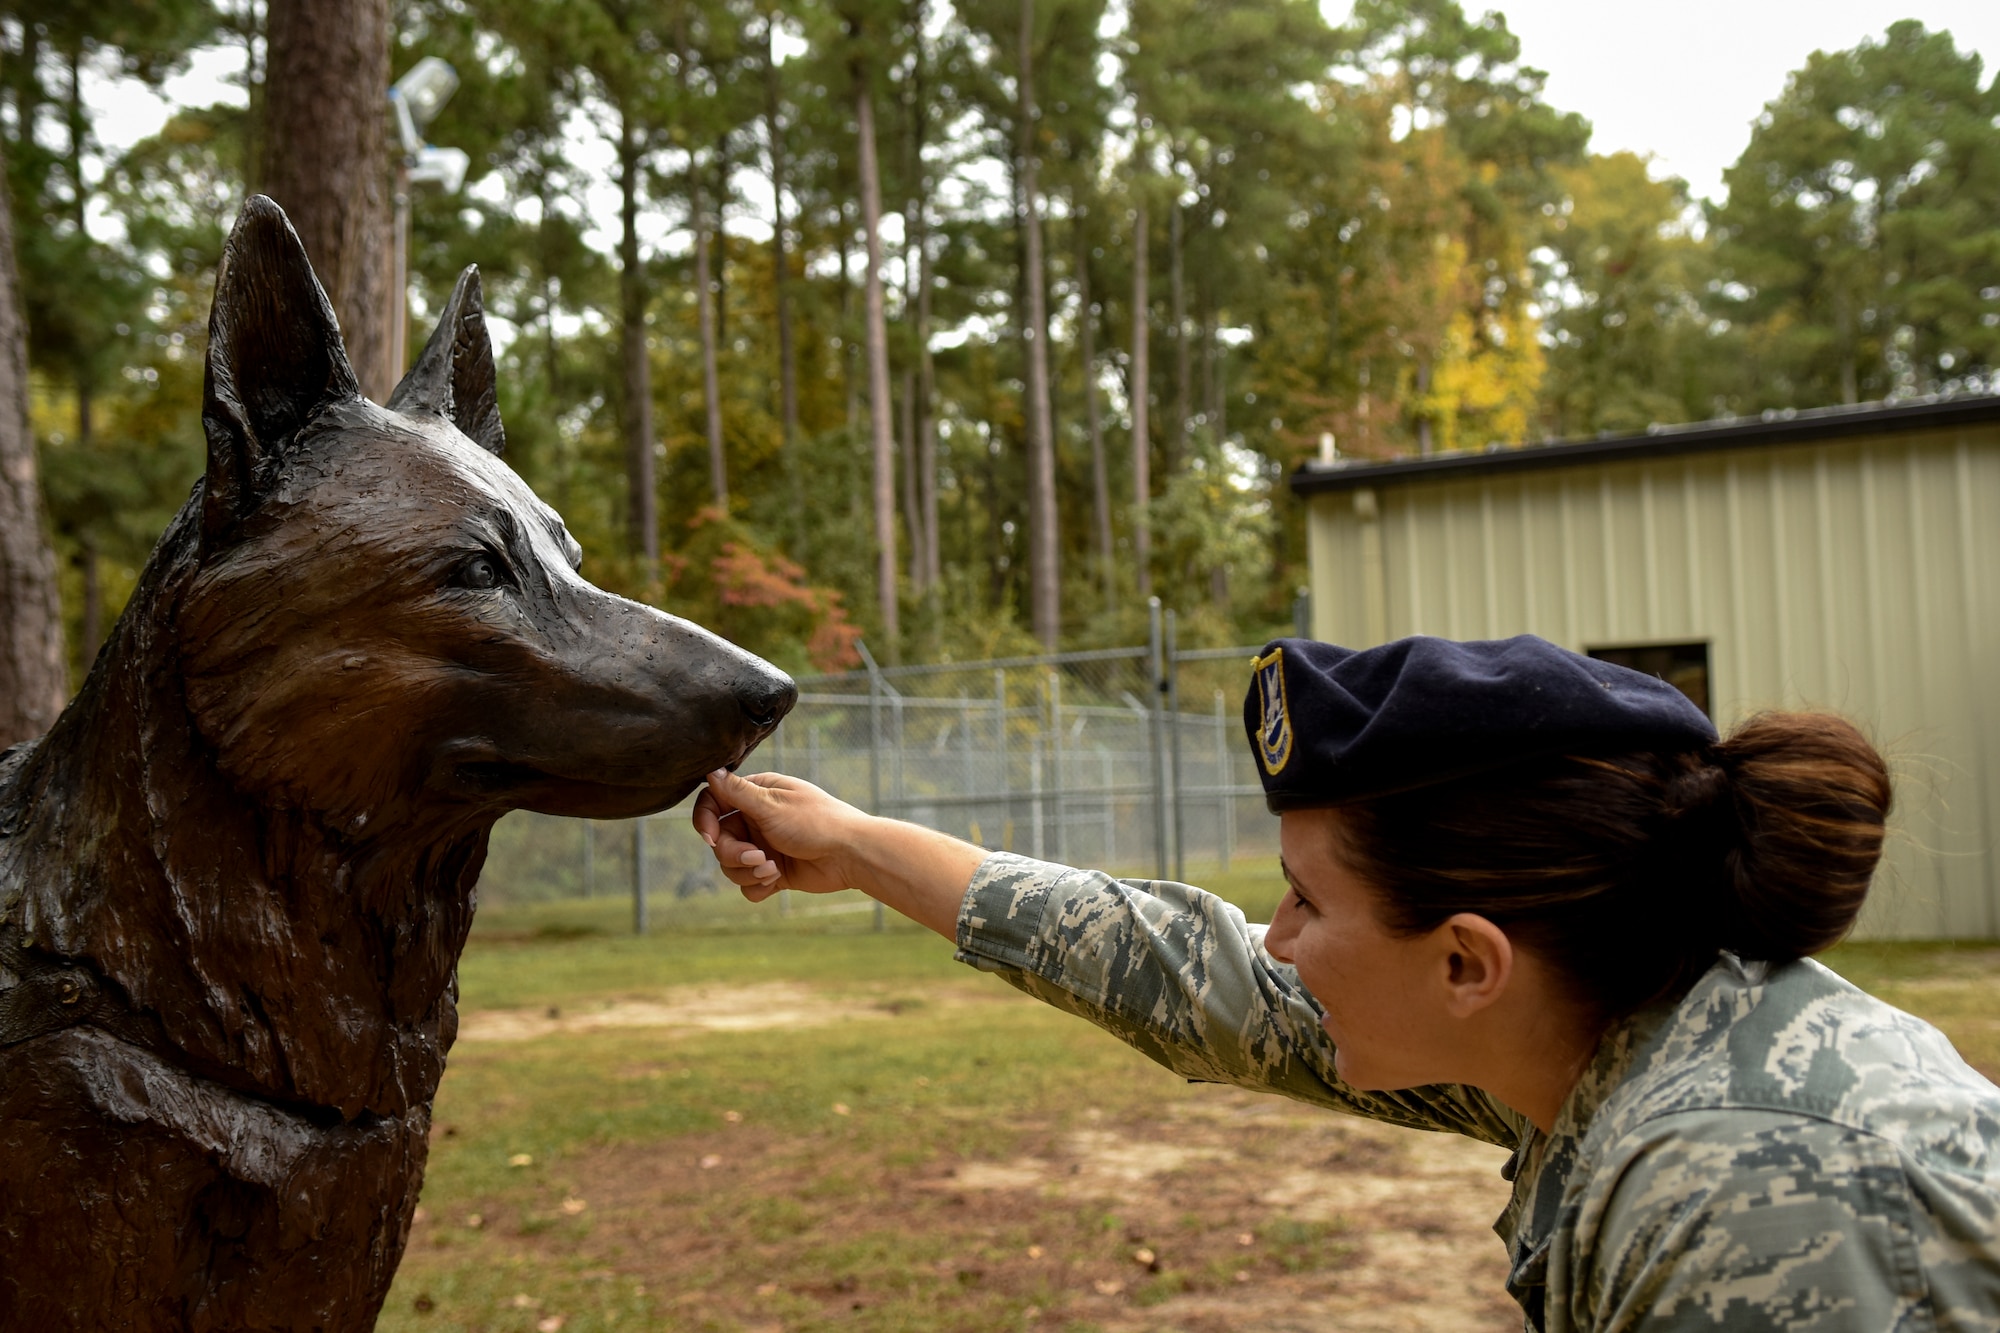 Staff Sgt. Kristina Dennison, 4th Security Forces Squadron military working dog handler, checks out the detail on the War Dog Memorial statue, Oct. 27, 2015, at Seymour Johnson Air Force Base, North Carolina. The statue is dedicated to all dogs, past and present, who served in the military. (U.S. Air Force photo/Airman Shawna L. Keyes)